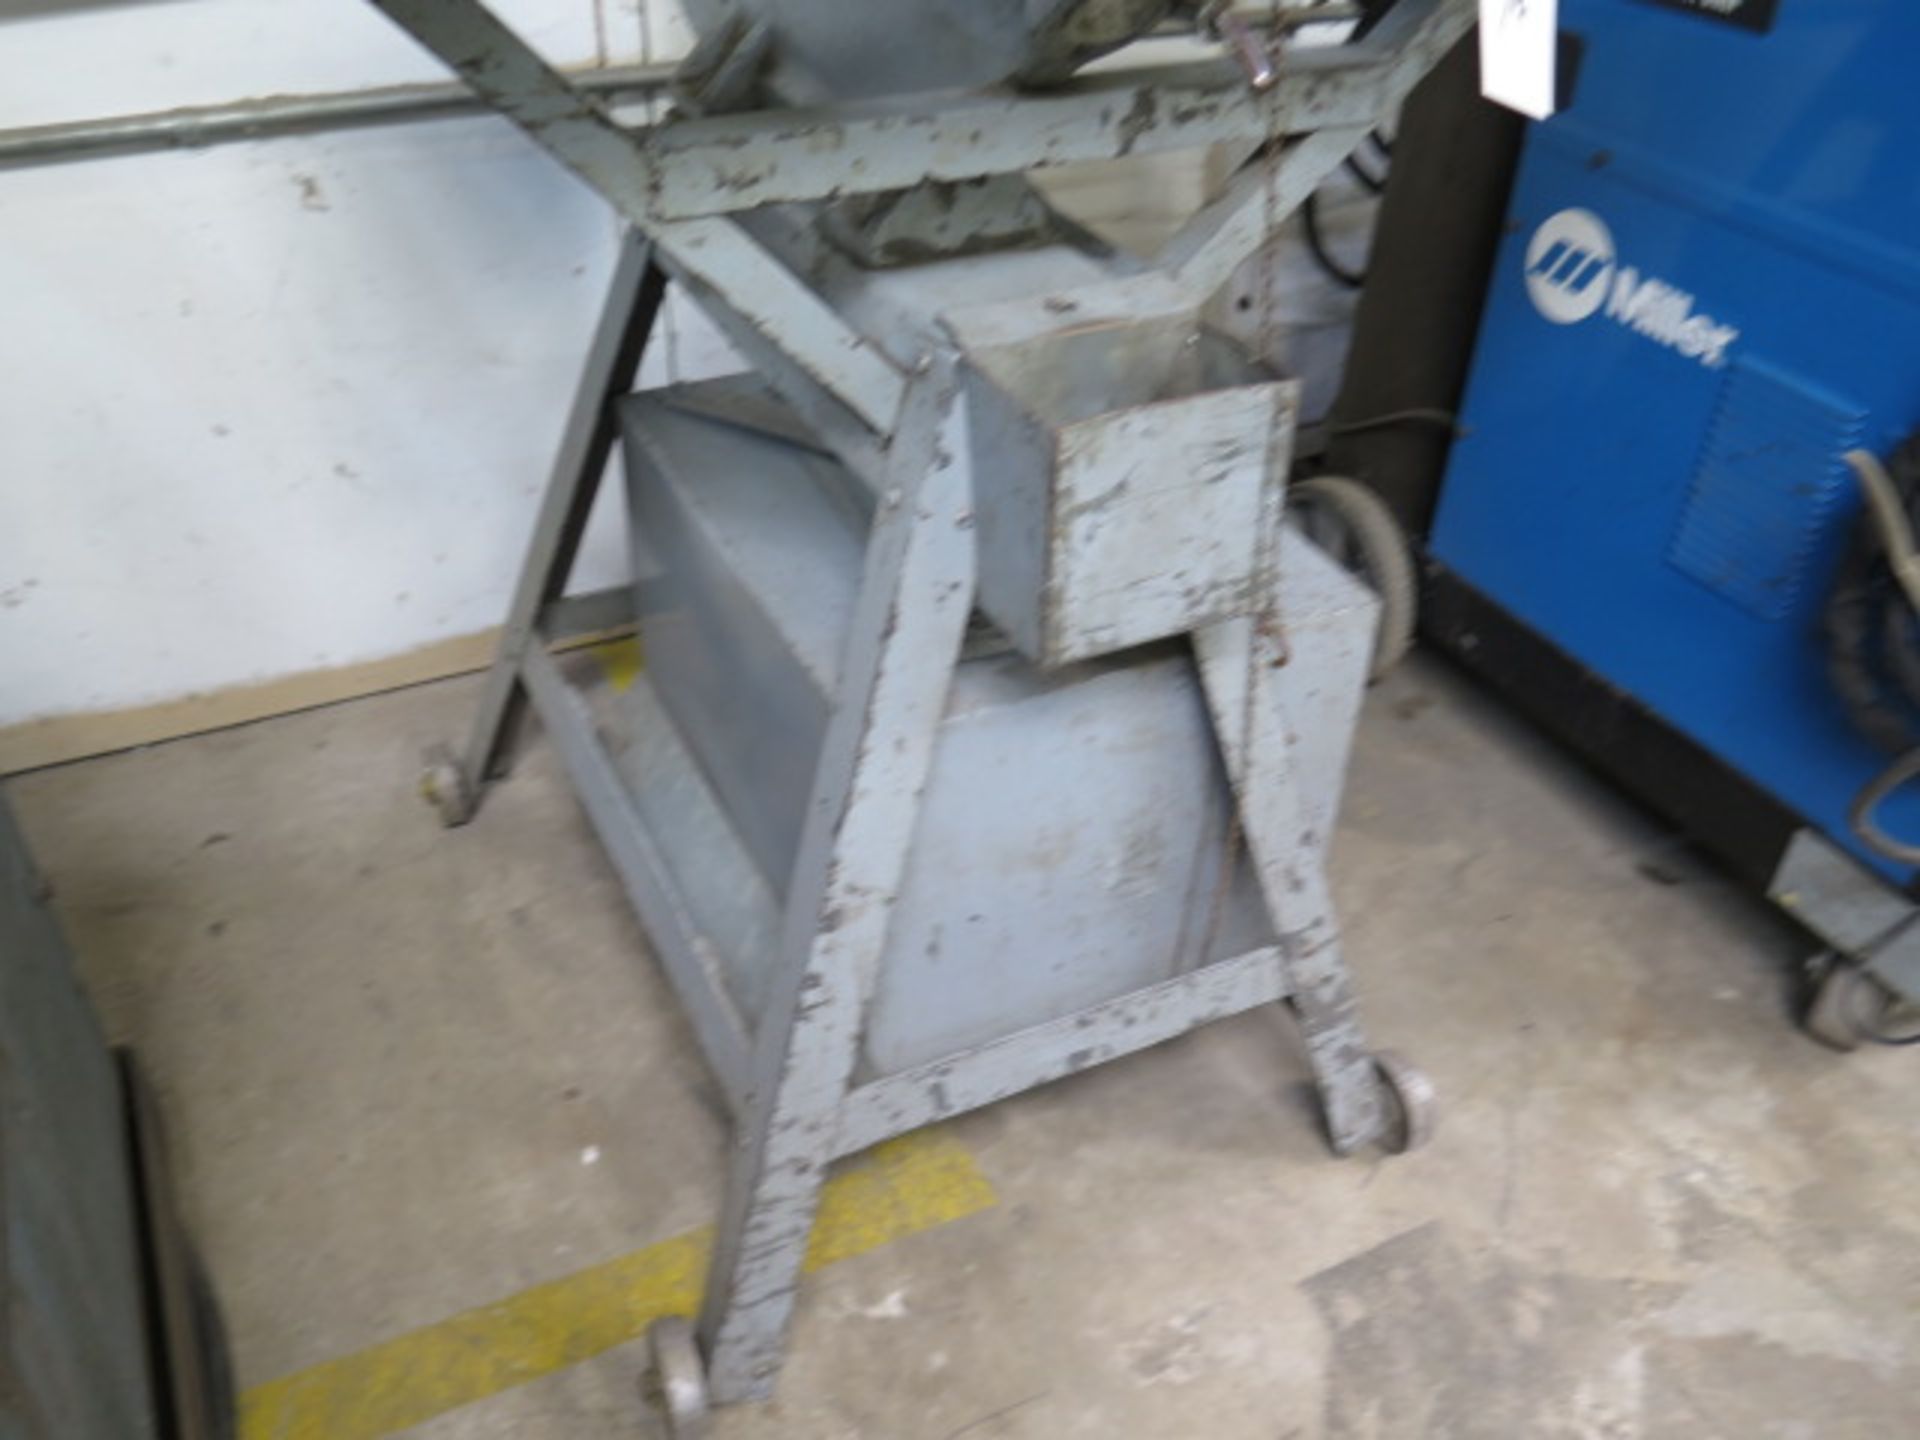 Rotex mdl 18A56 18-Station Turret Punch Press s/n 11980 w/ Rolling Stand (SOLD AS-IS - NO WARRANTY) - Image 4 of 8